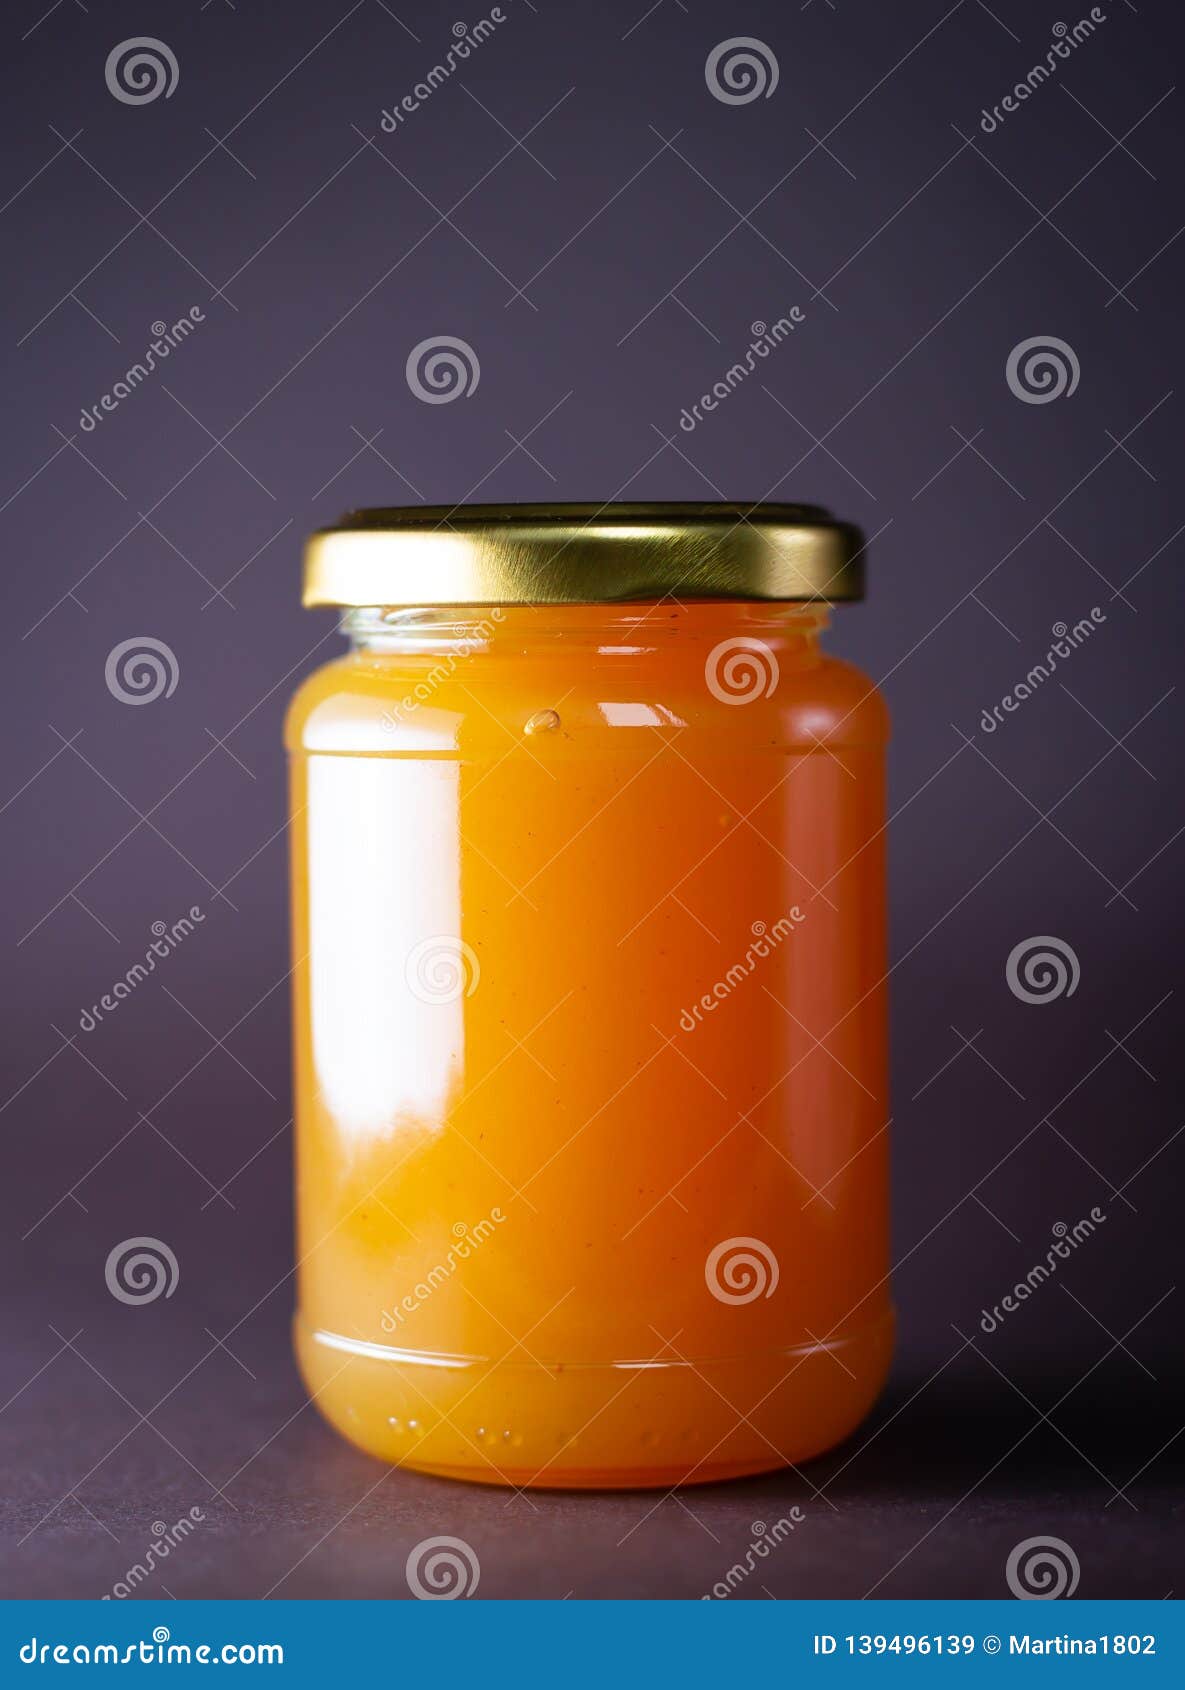 Download Jar Of Yellow Jam Stock Image Image Of Confiture Isolated 139496139 Yellowimages Mockups